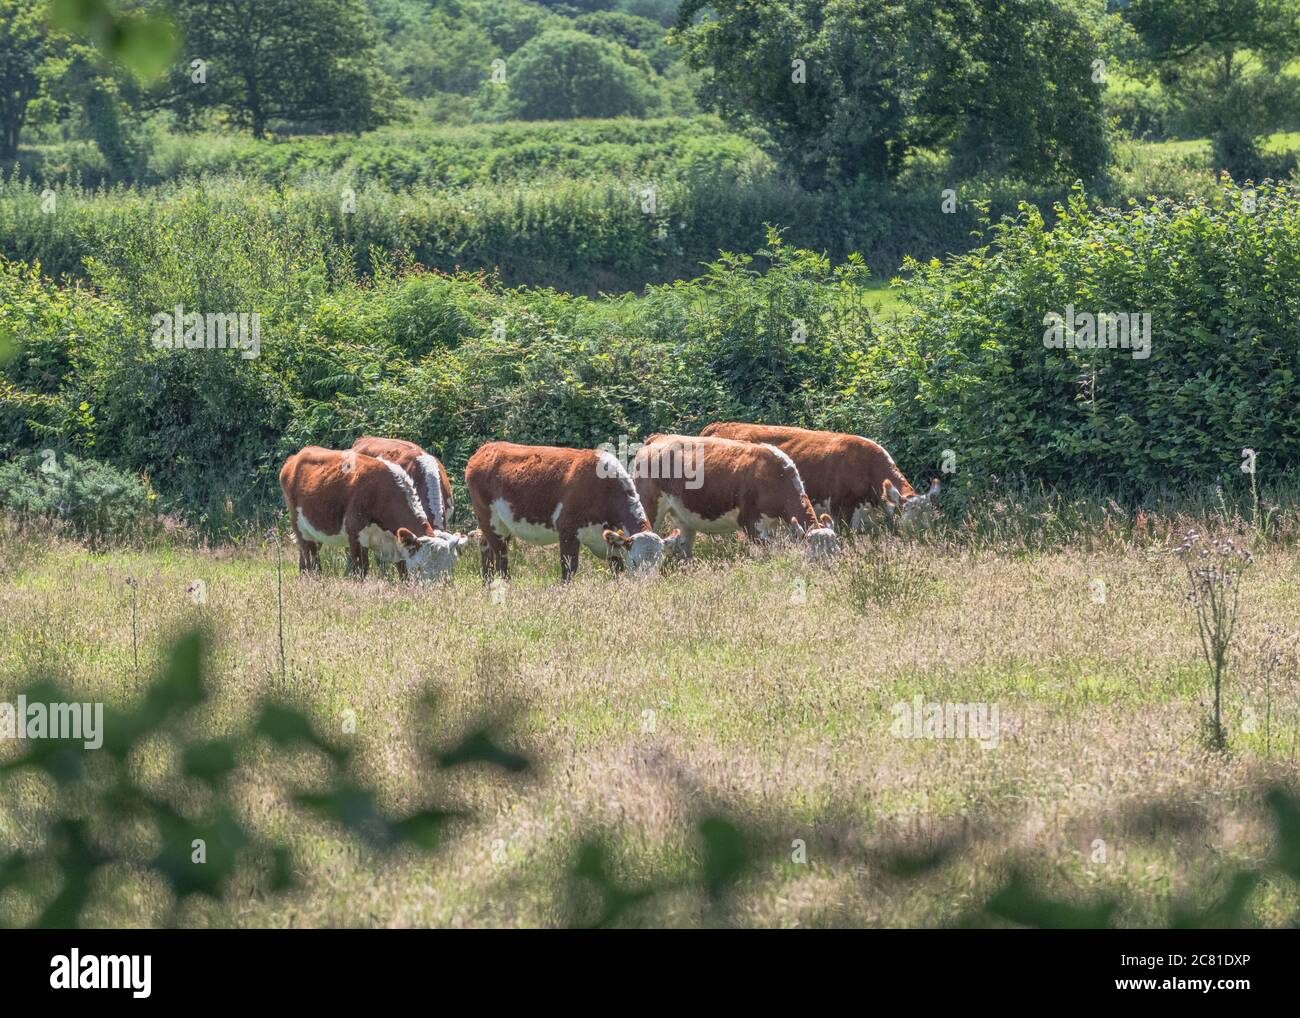 Cattle grazing in pasture. Believed to be Hereford cattle breed. For UK livestock industry, livestock farming, cows, UK cattle breeds, British beef. Stock Photo